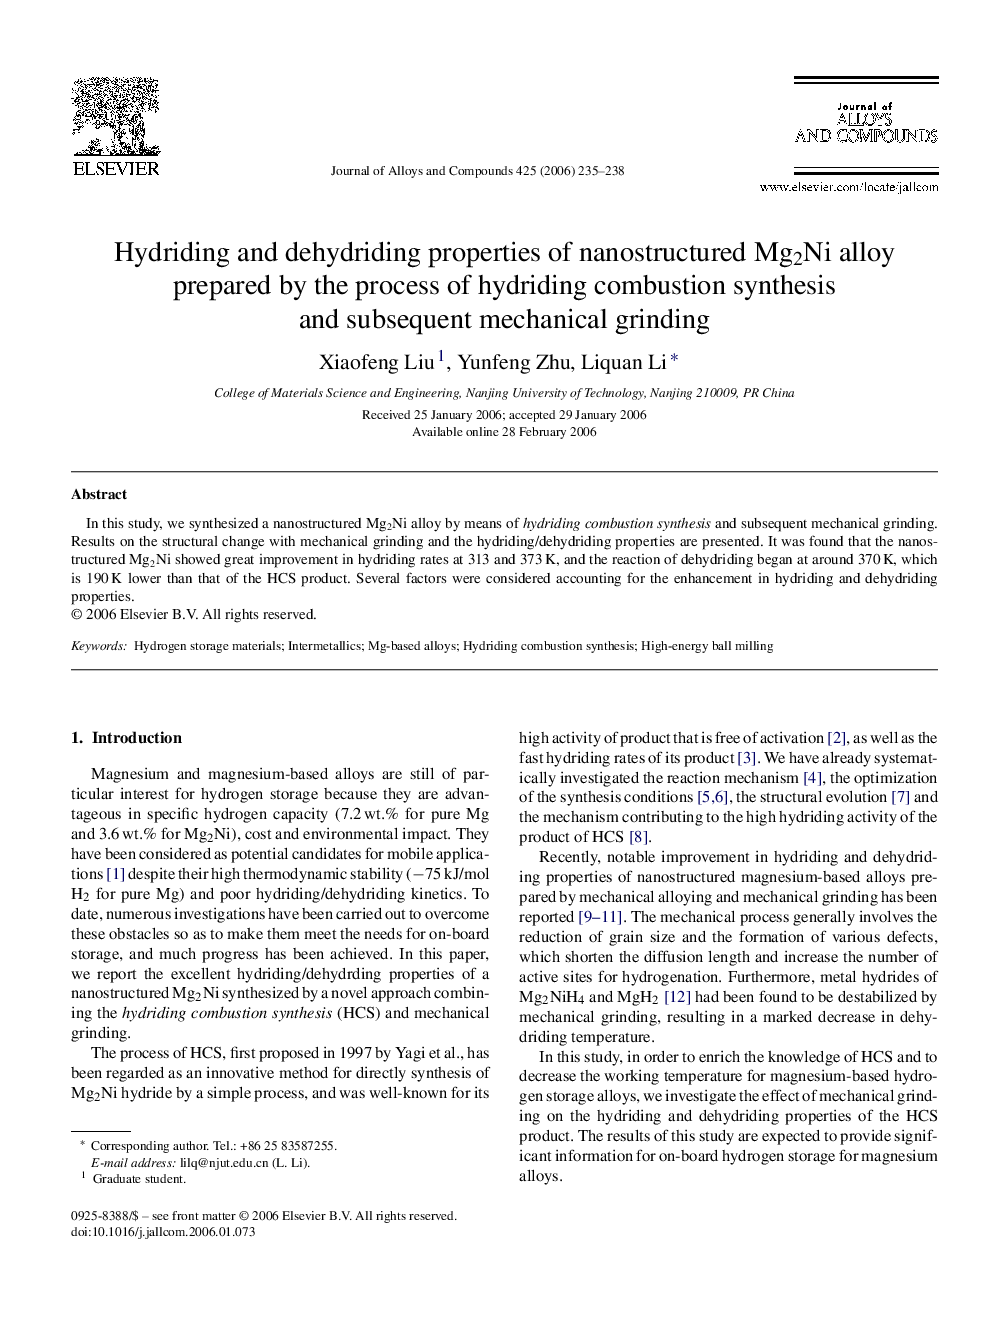 Hydriding and dehydriding properties of nanostructured Mg2Ni alloy prepared by the process of hydriding combustion synthesis and subsequent mechanical grinding